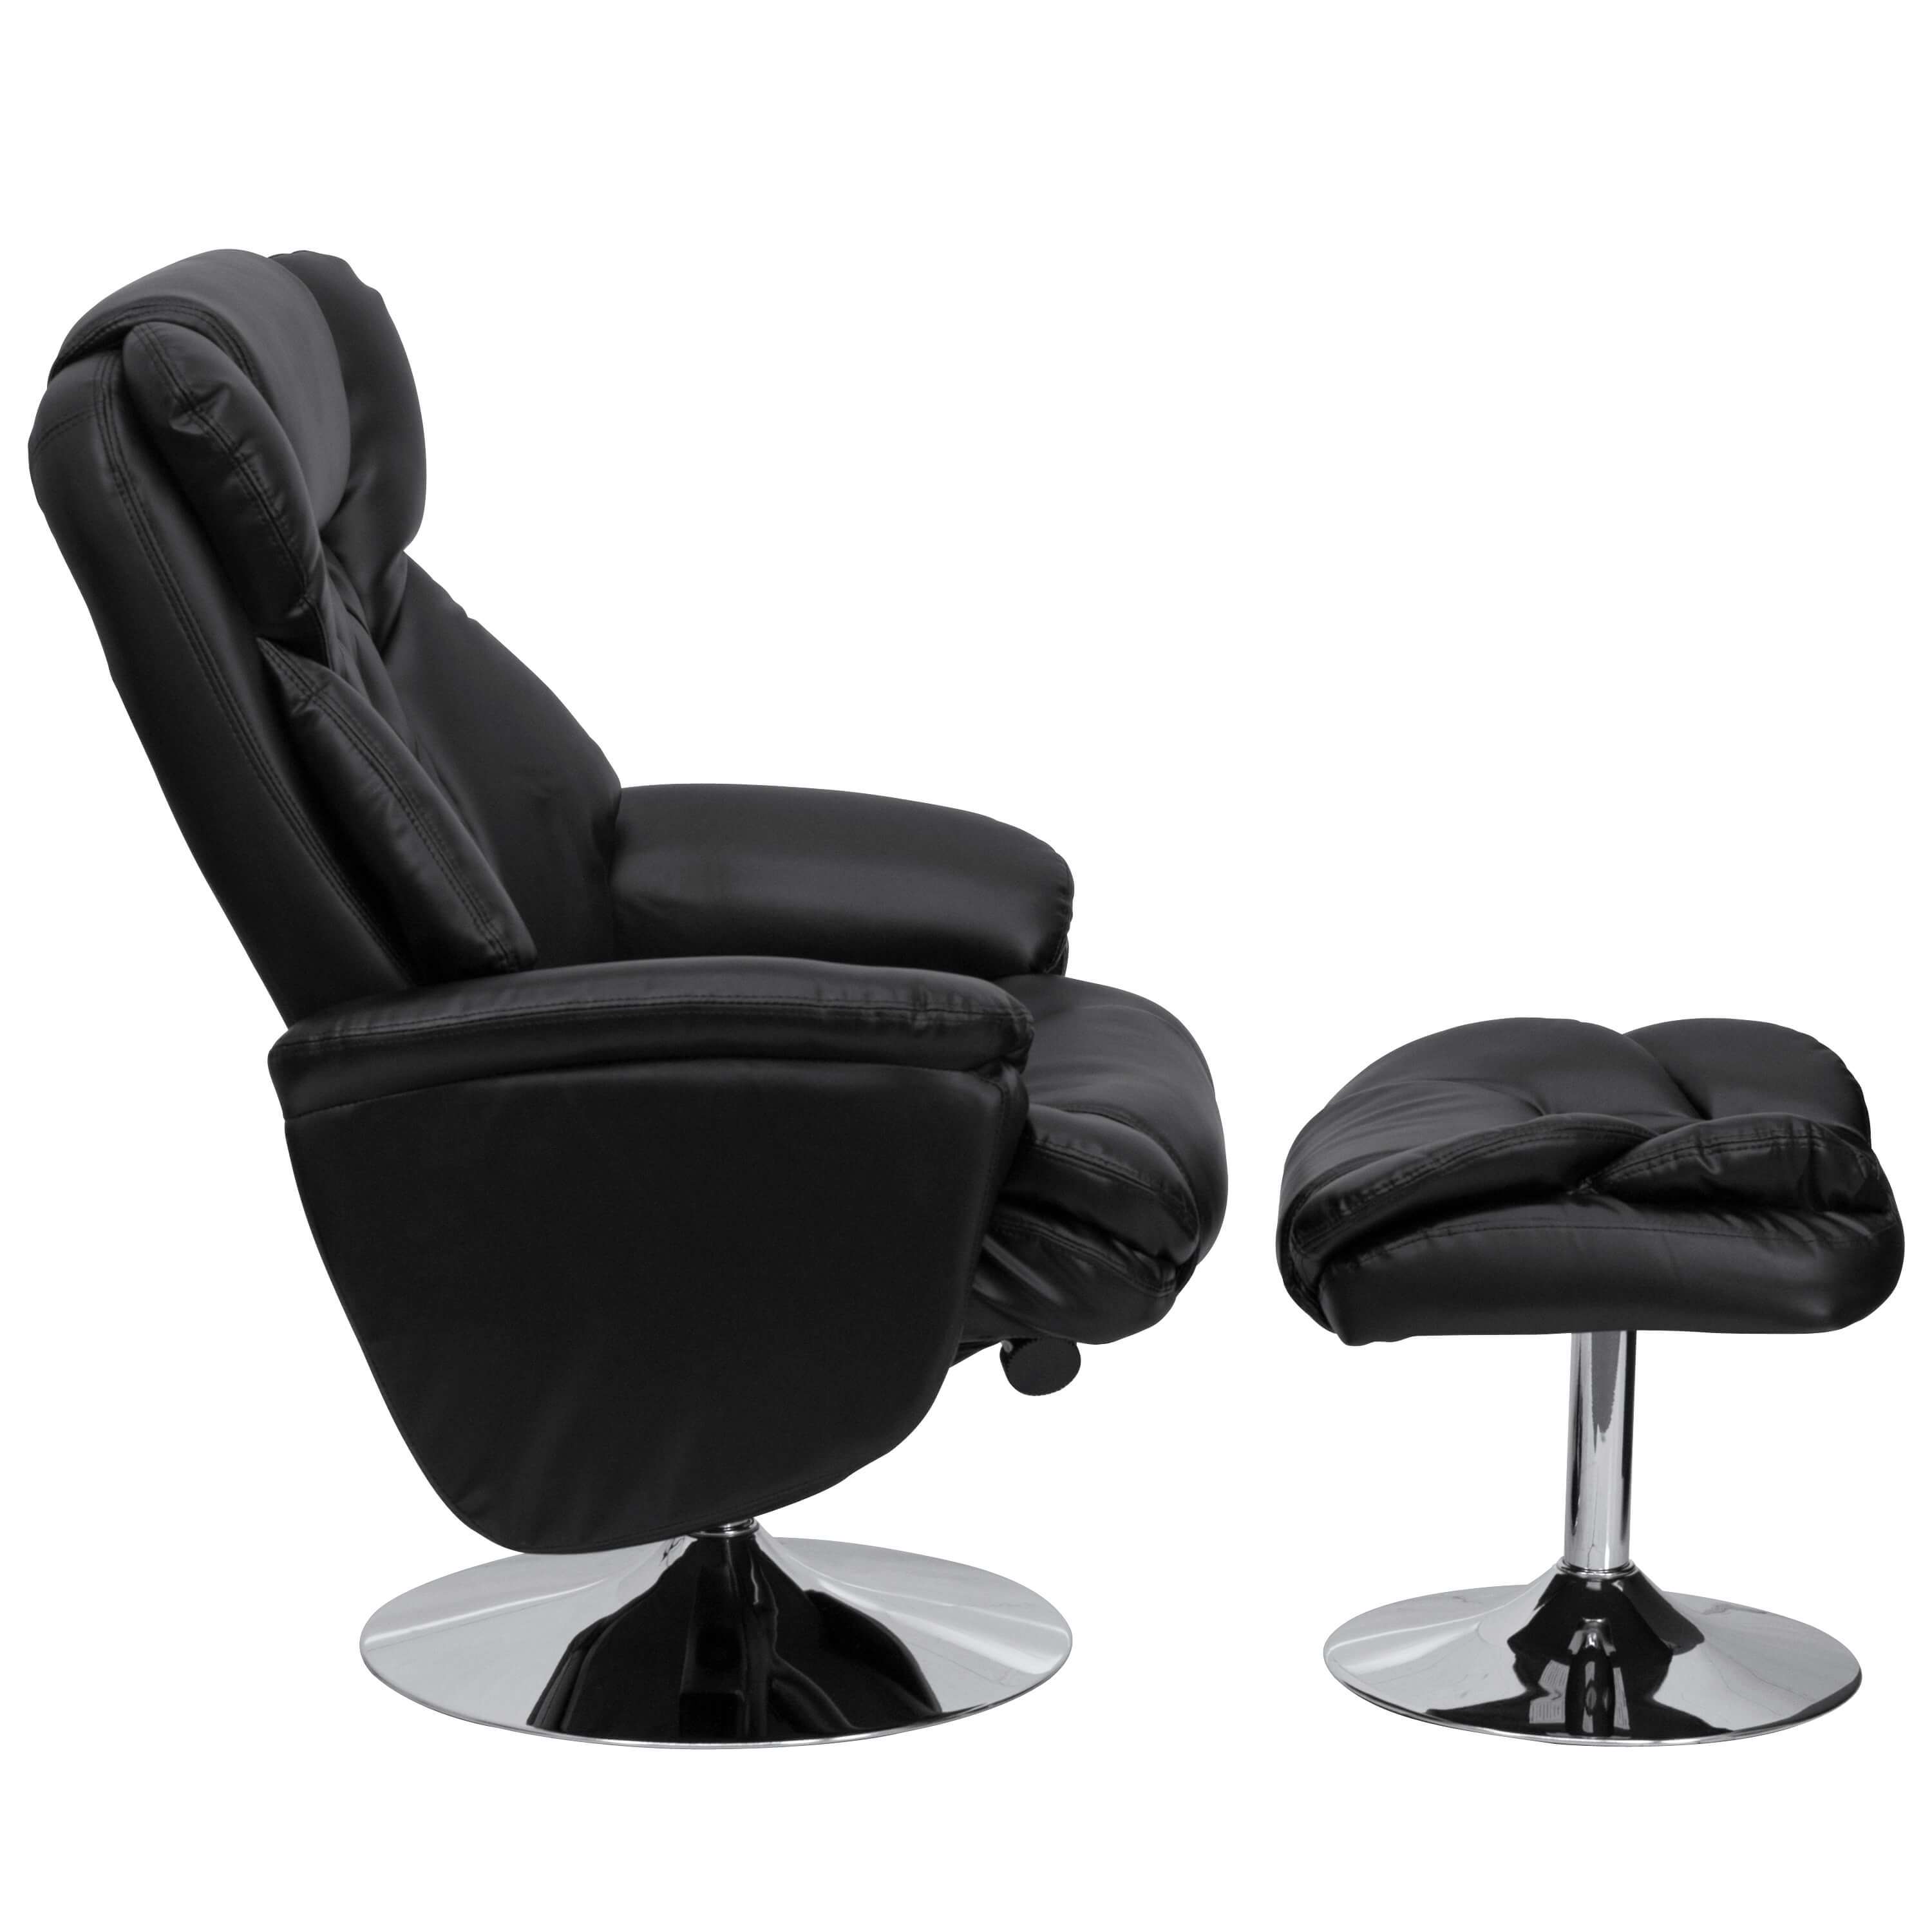 Black leather recliner chair side view